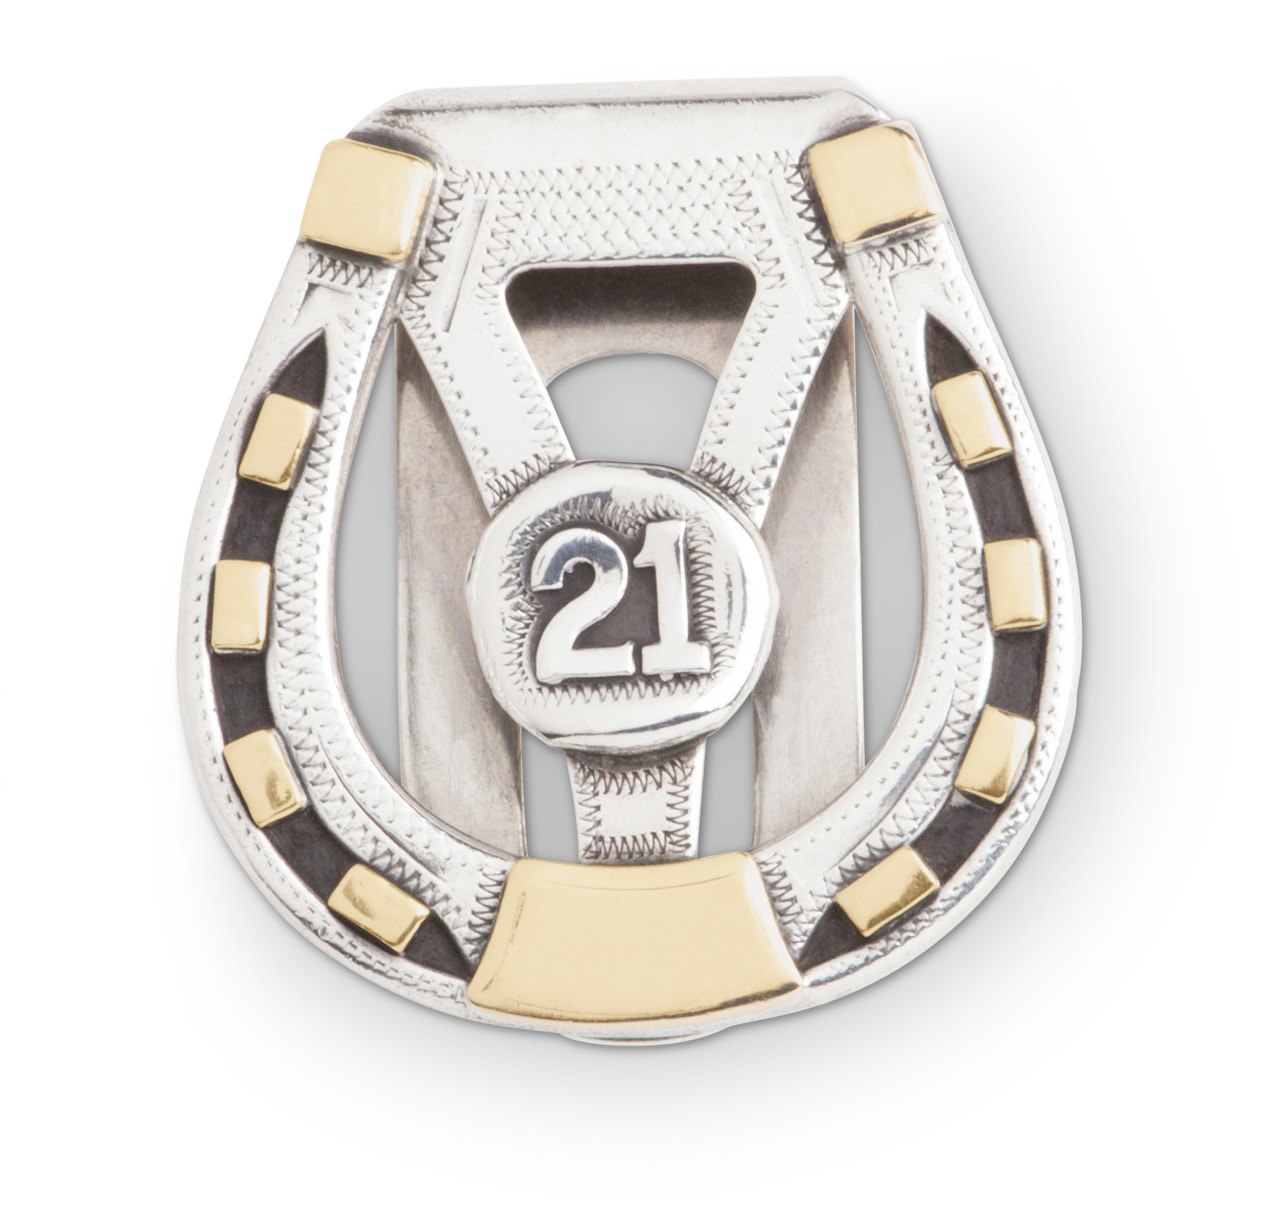 Sterling Silver & Gold Horseshoe "21 Club" Money Clip